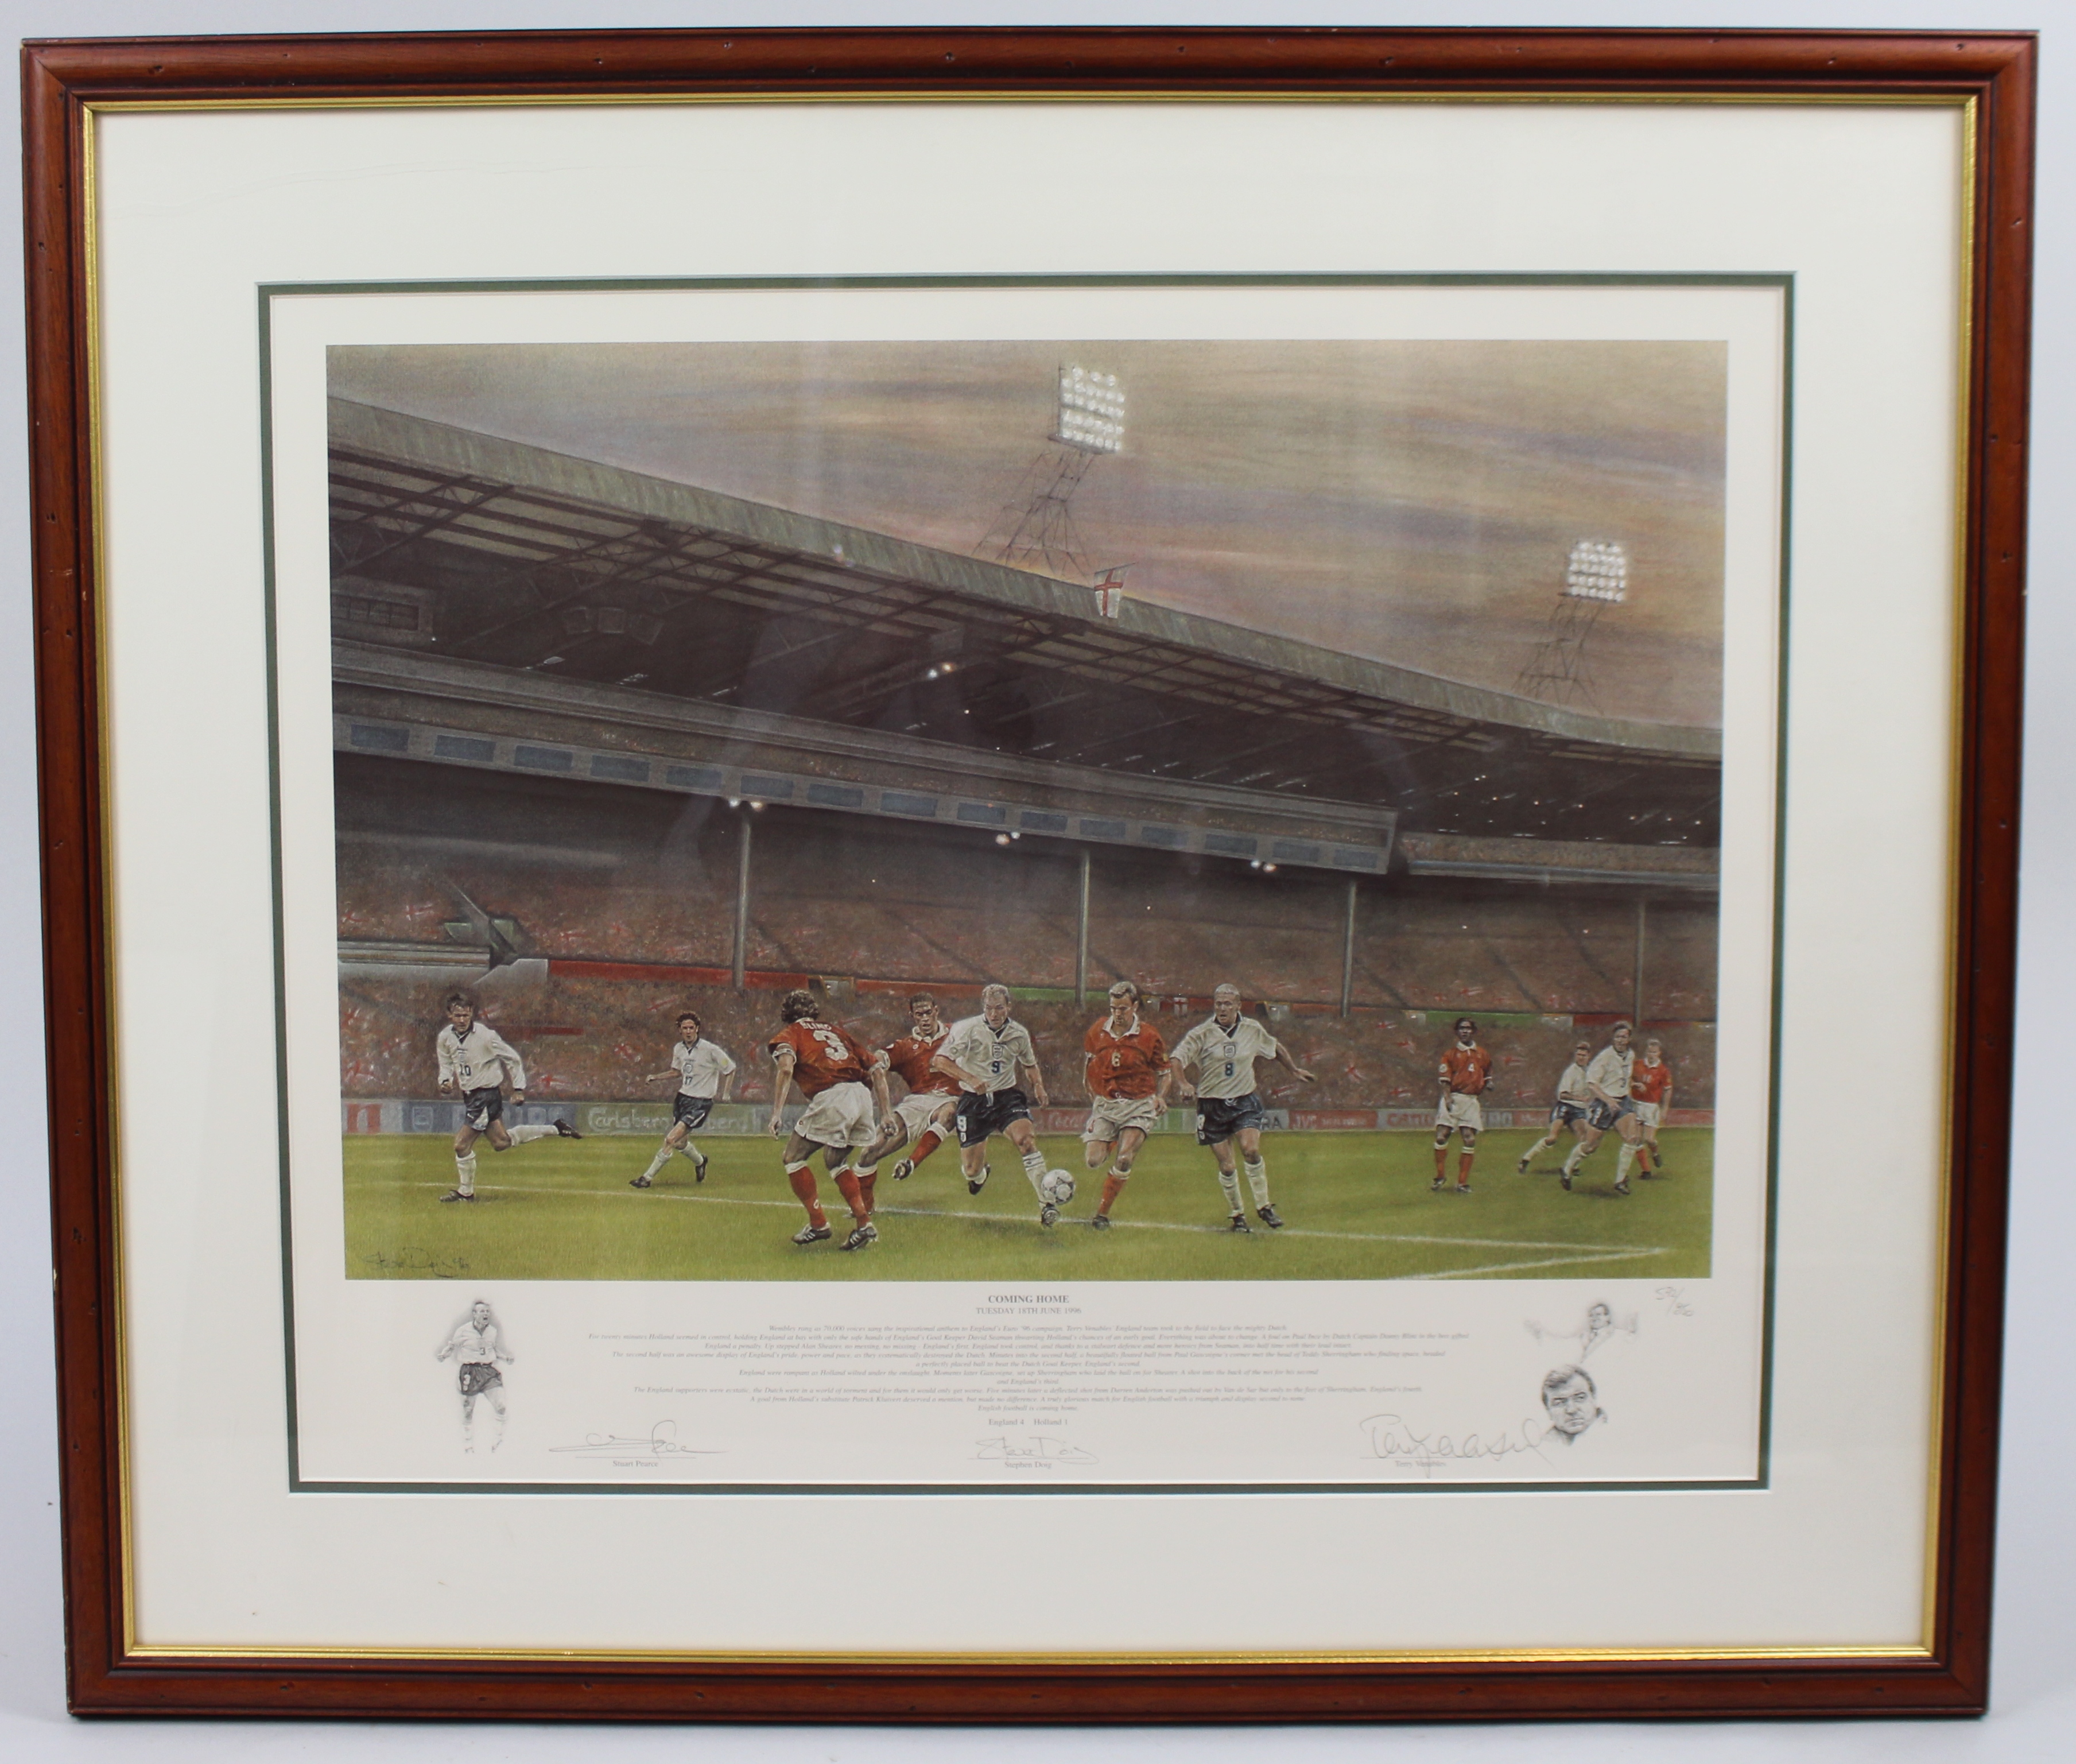 Signed Limited Edition Framed Football Print "Coming Home"